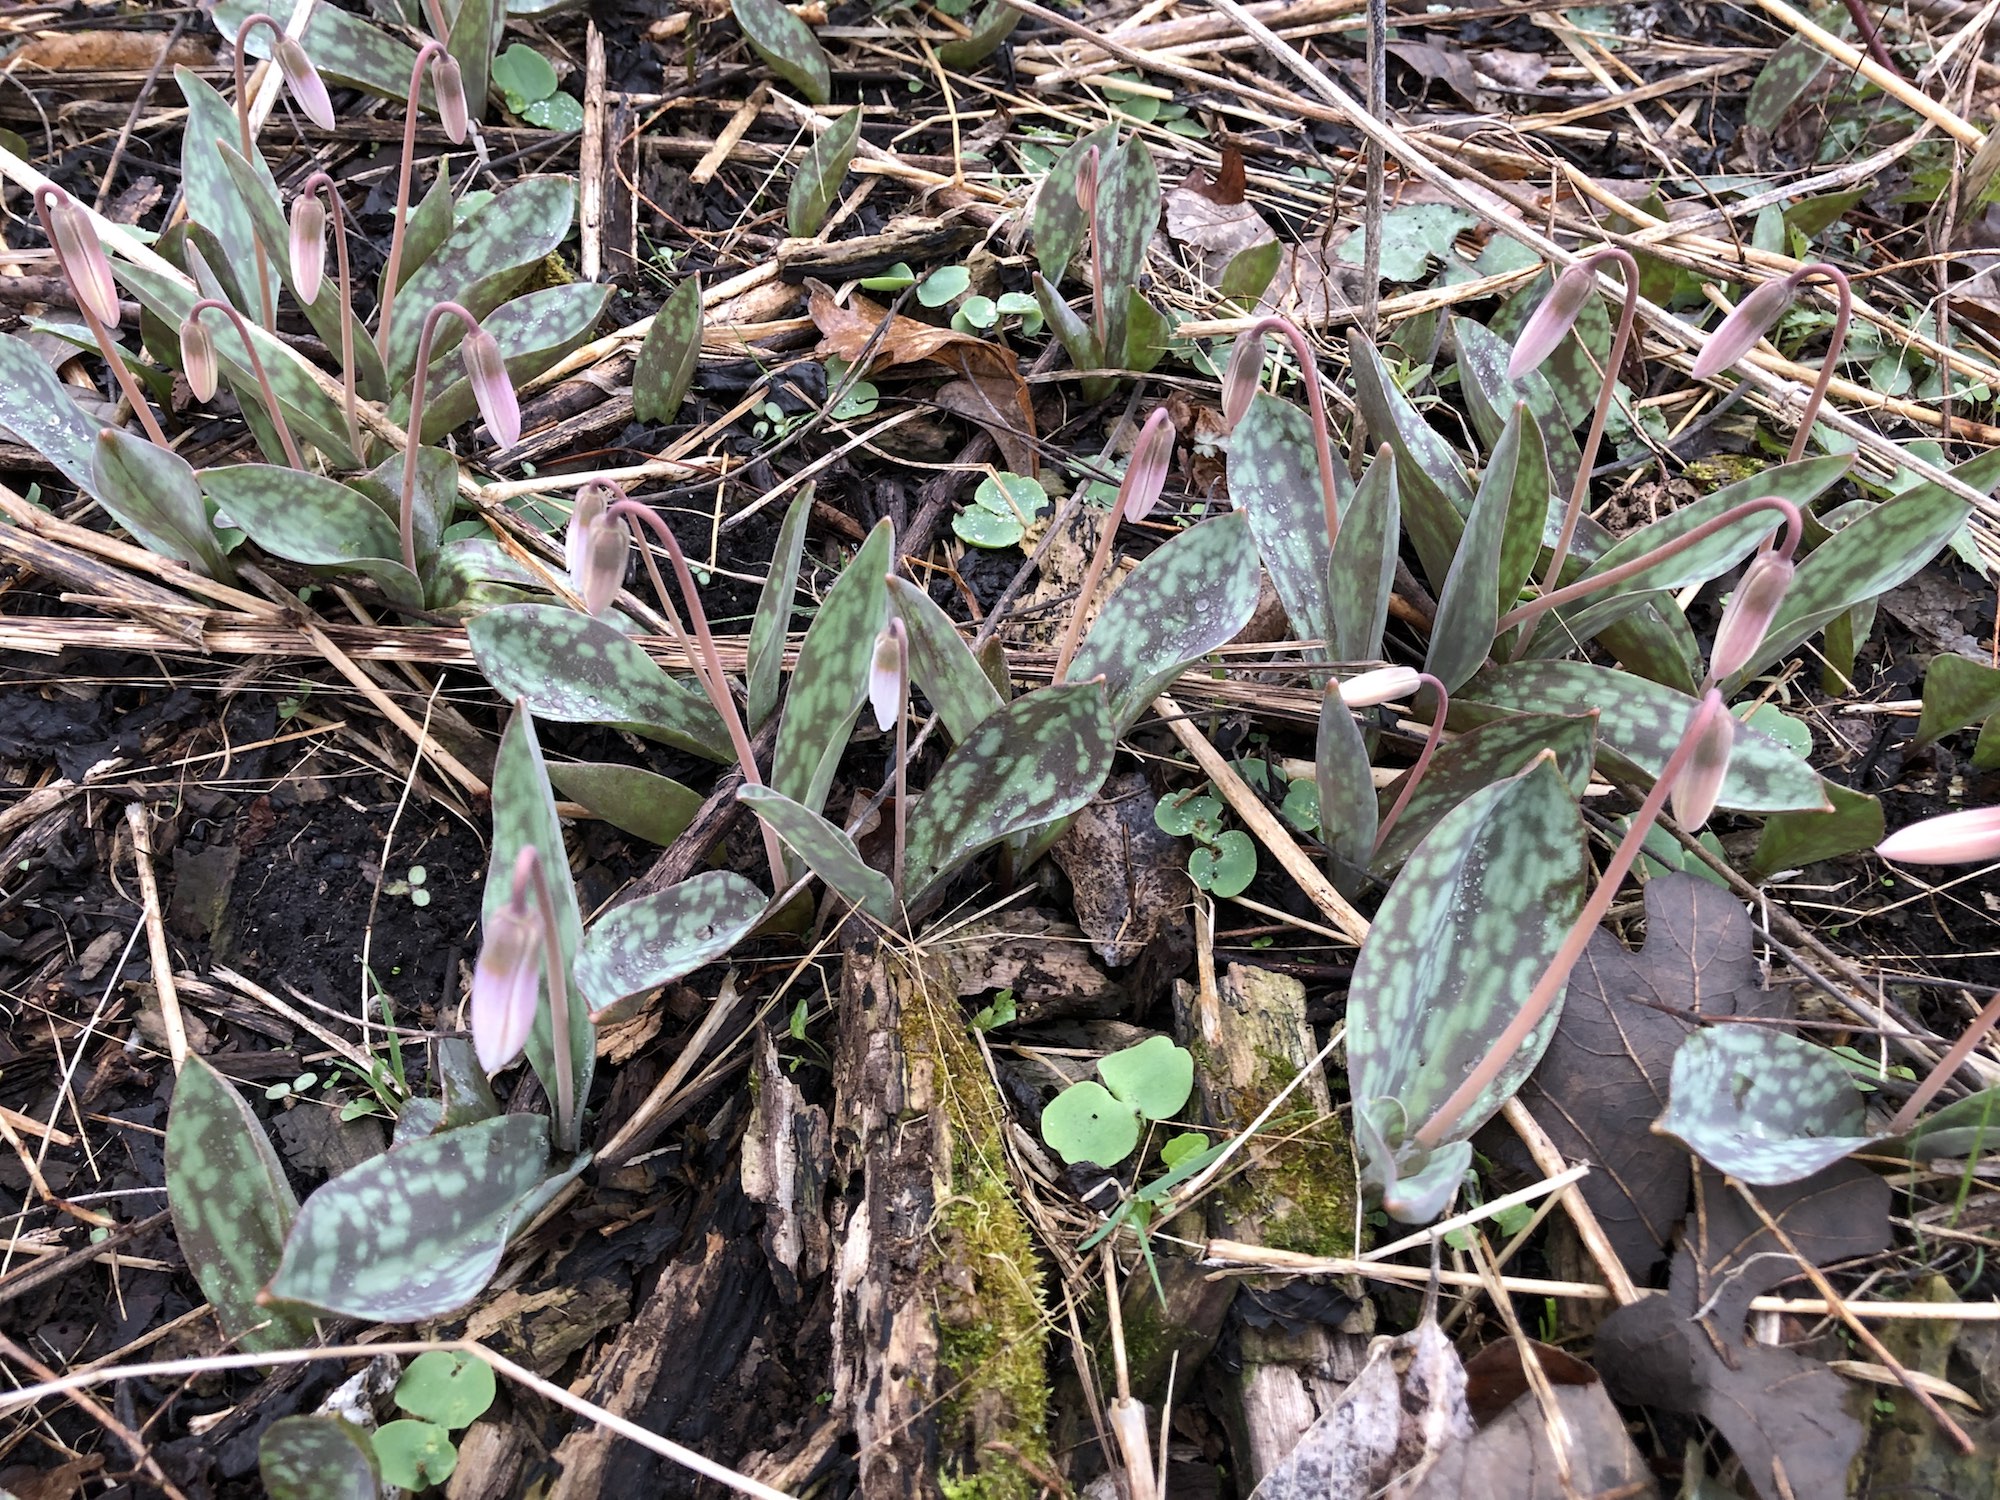 White Trout Lilies on April 18, 2019 near Council Ring.